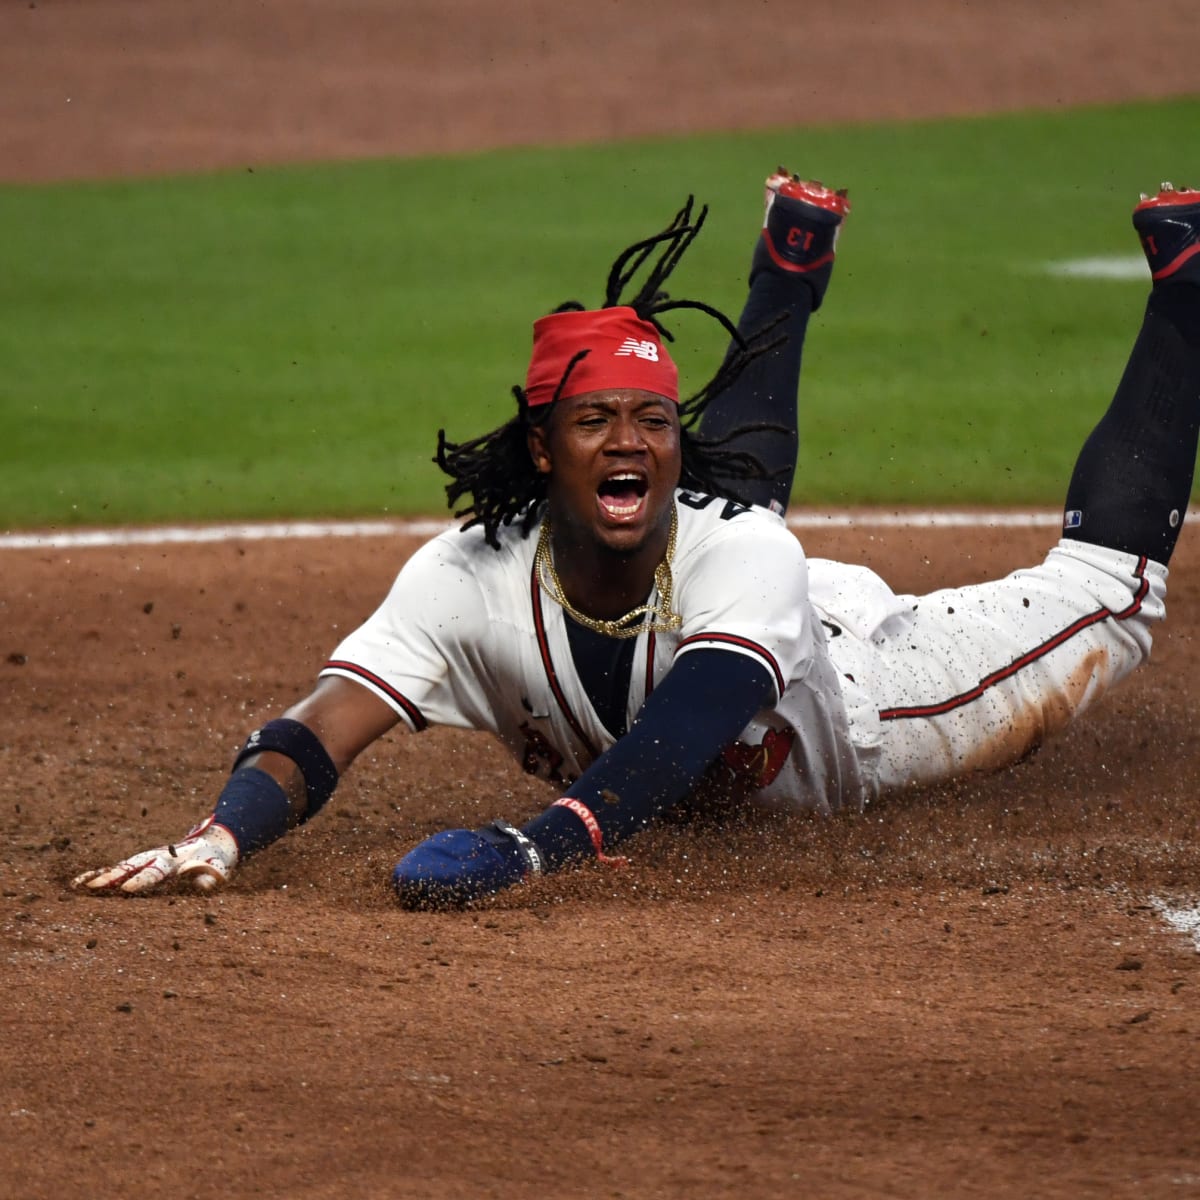 Braves' Ronald Acuña Jr. hit on the left elbow by a pitch, leaves